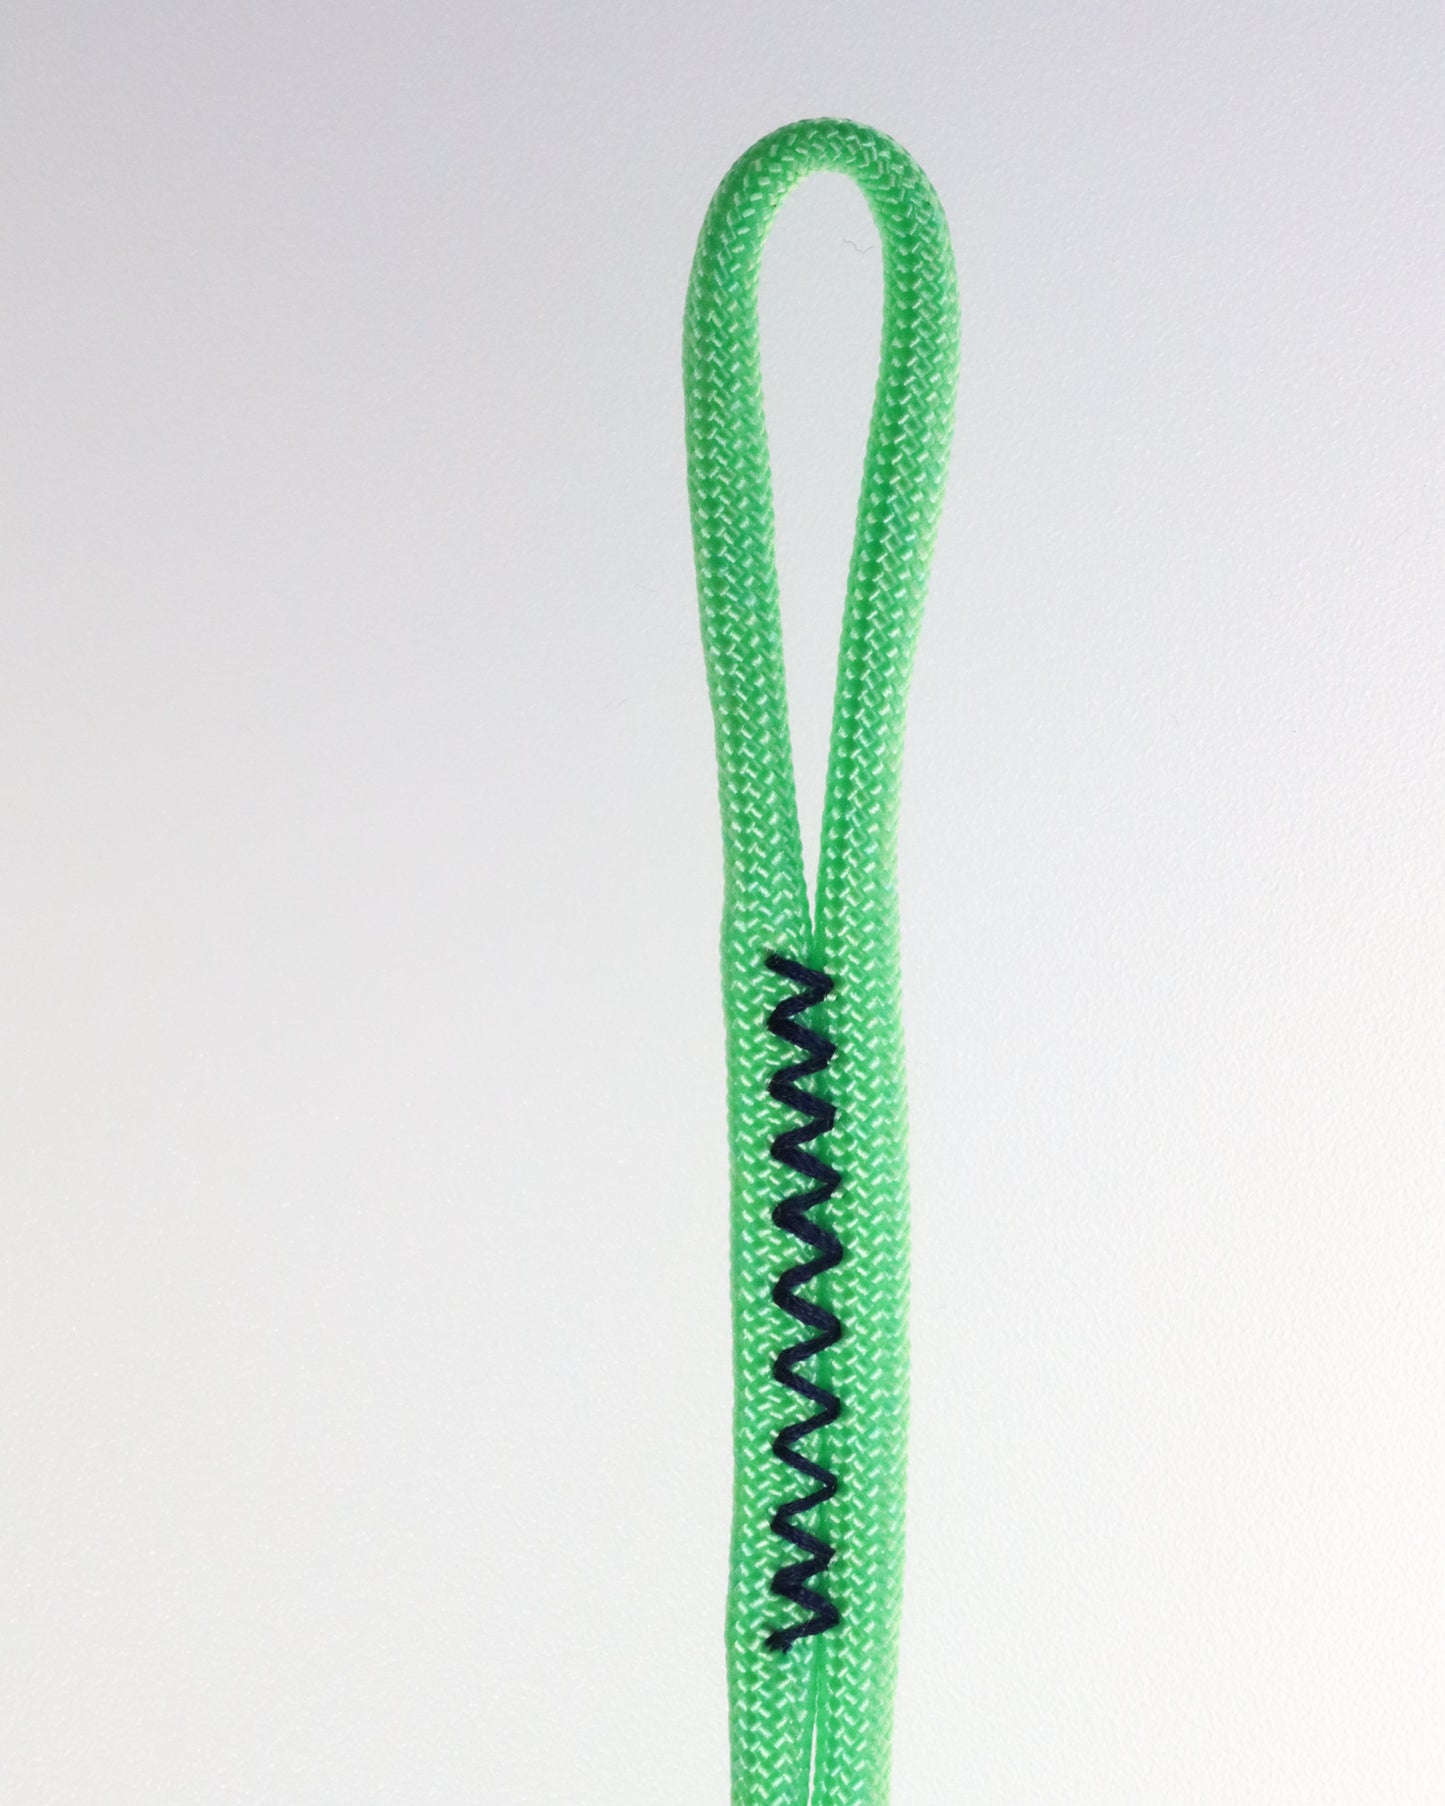 U.BAG Strap Extension made from paracord in color mint